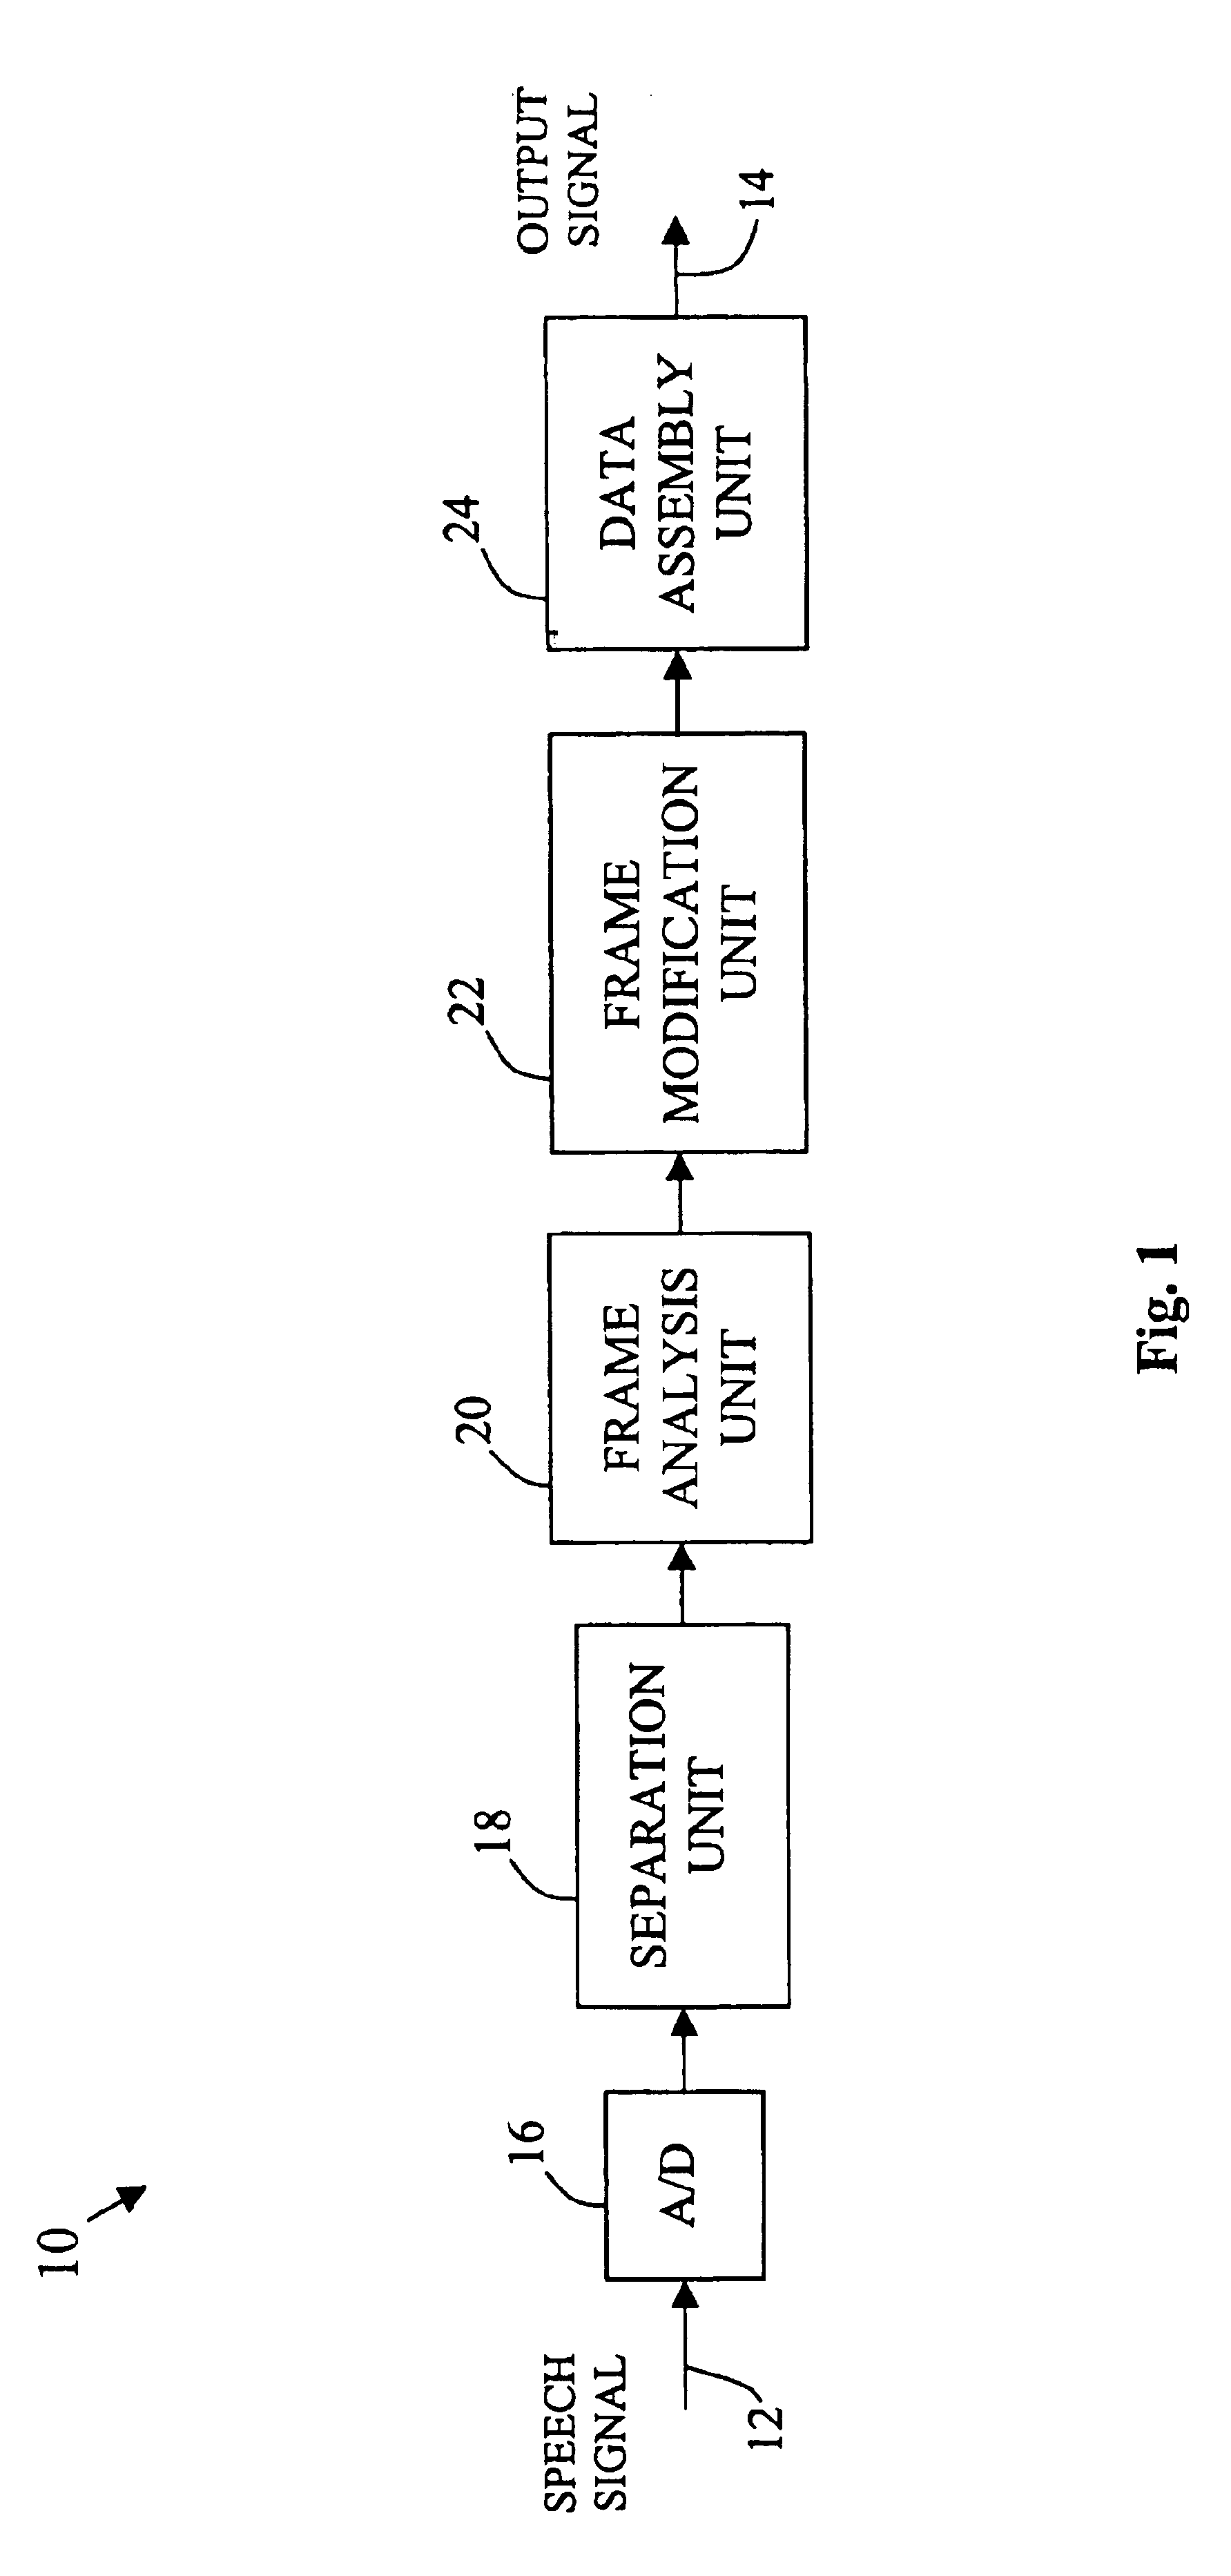 Method and apparatus for improving the intelligibility of digitally compressed speech